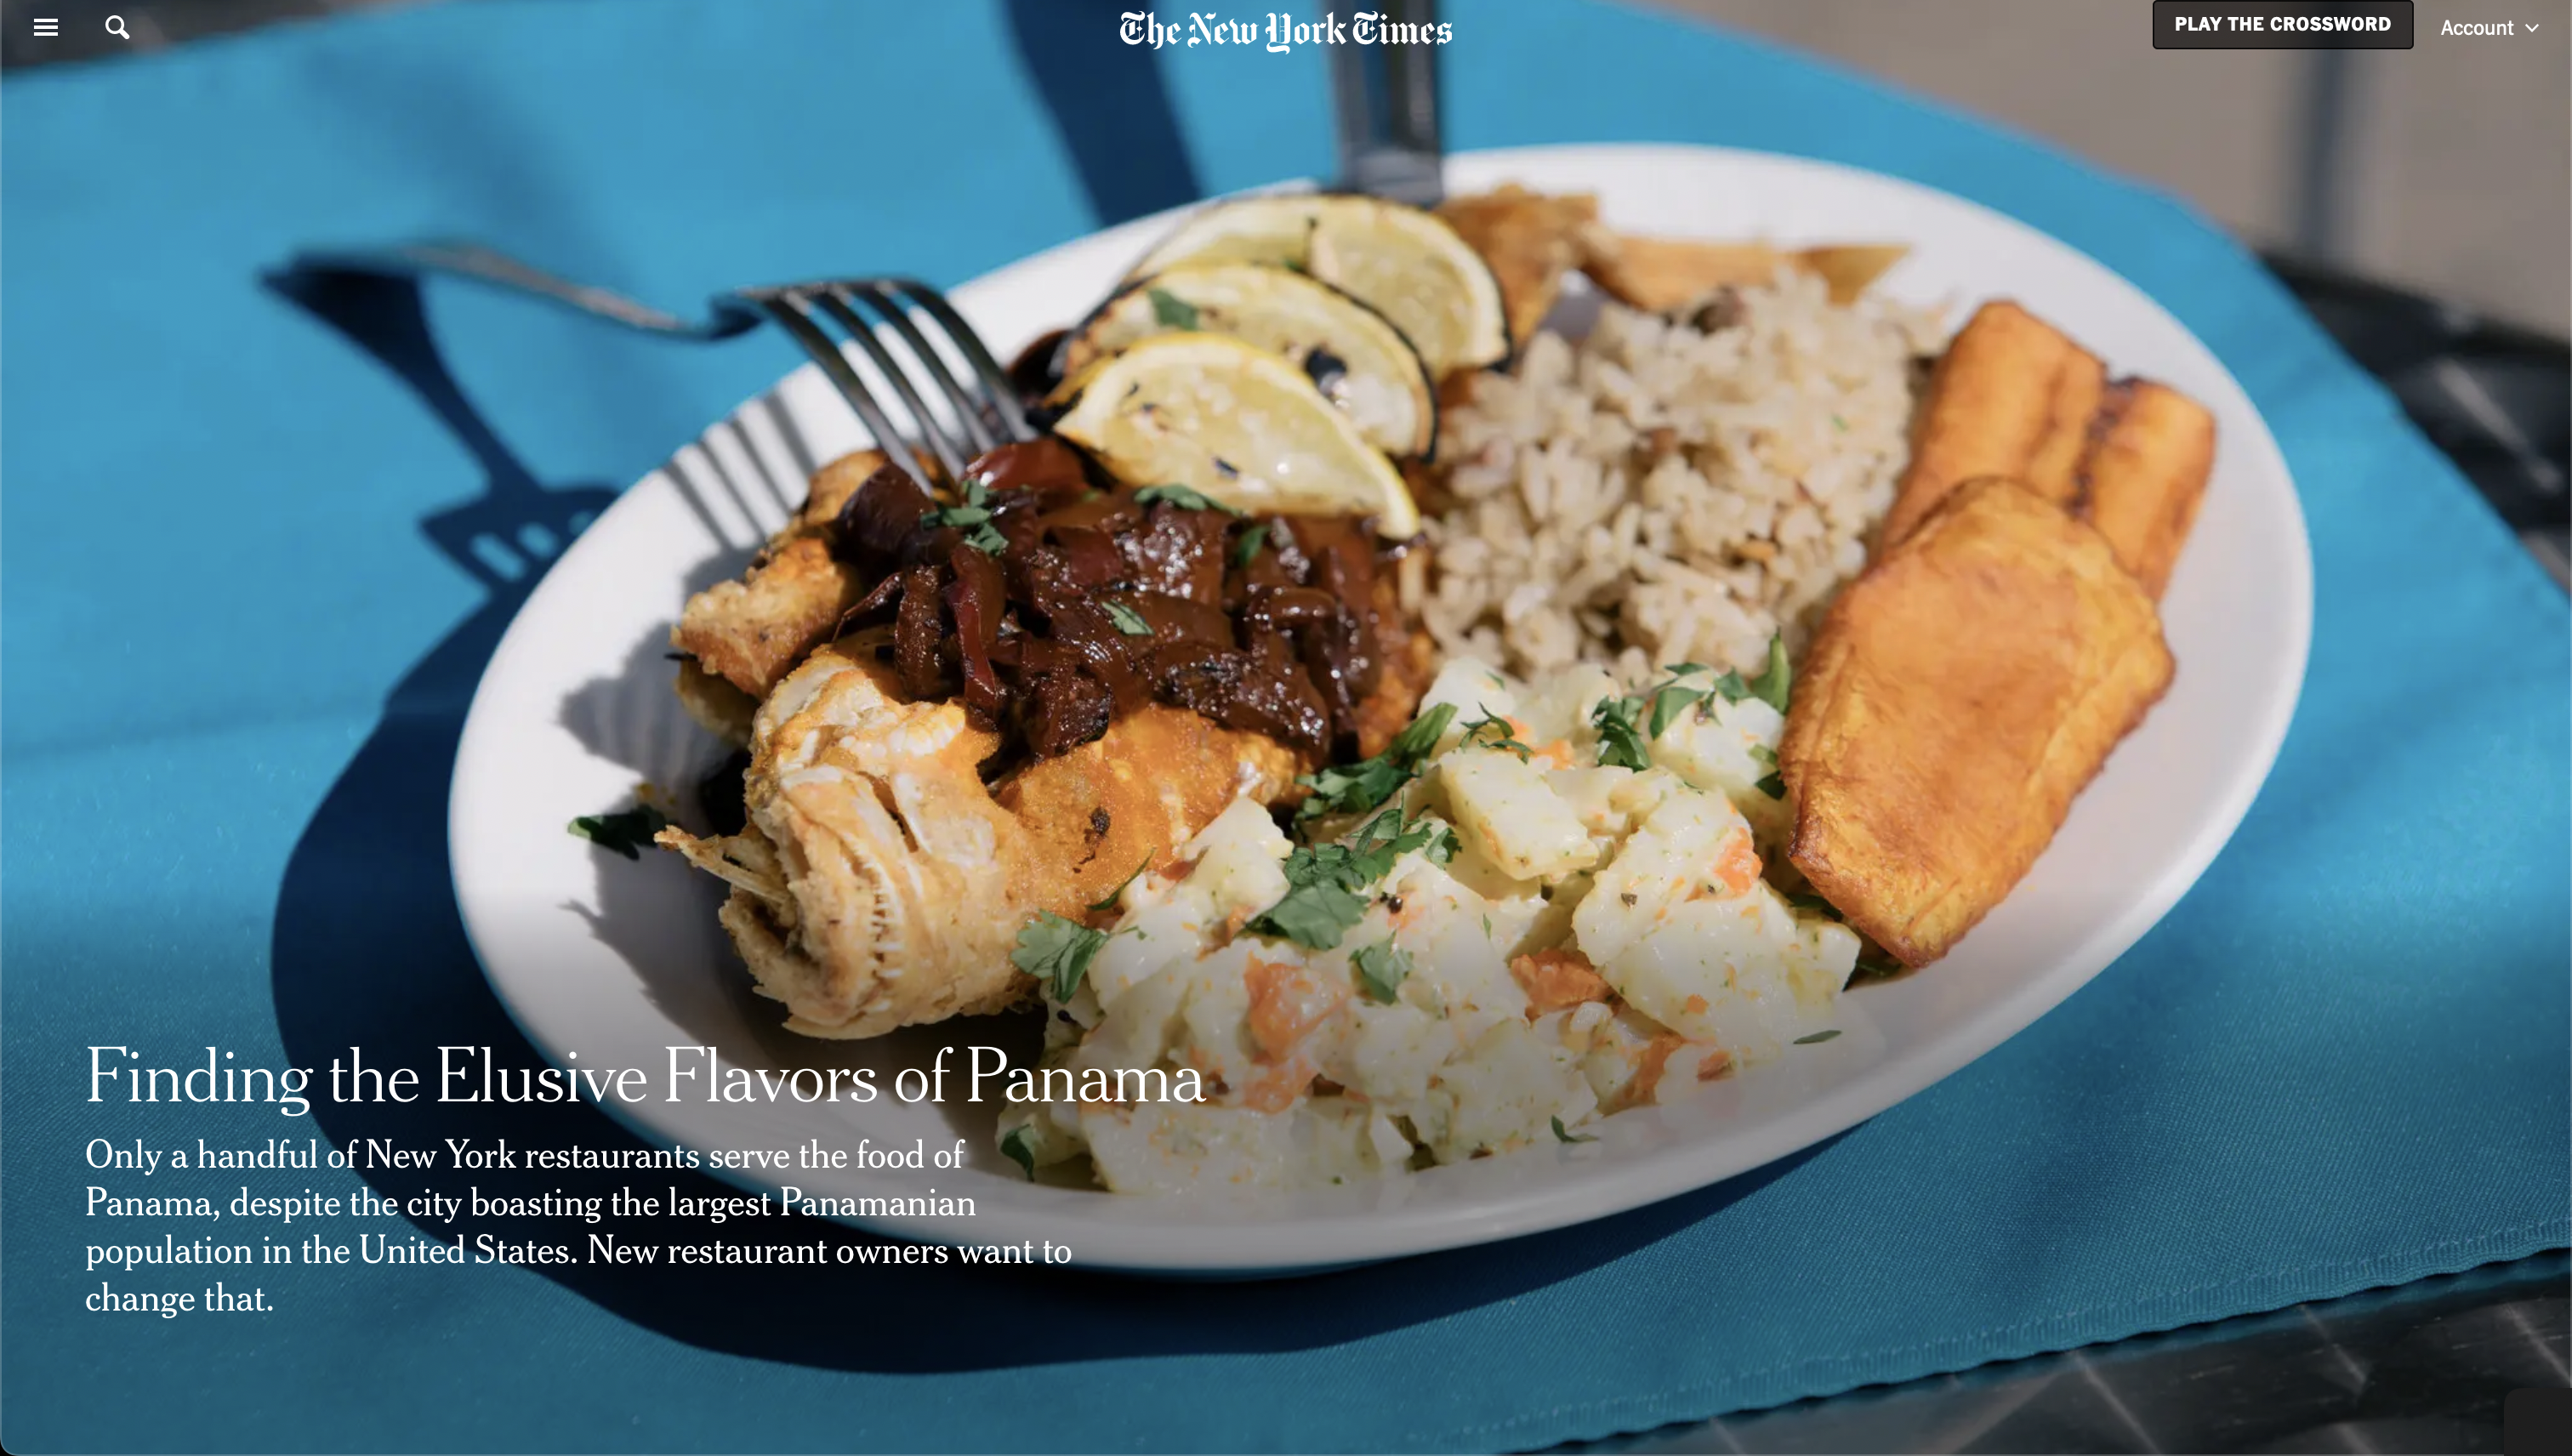 Thumbnail of for The New York Times: Finding the Elusive Flavors of Panama